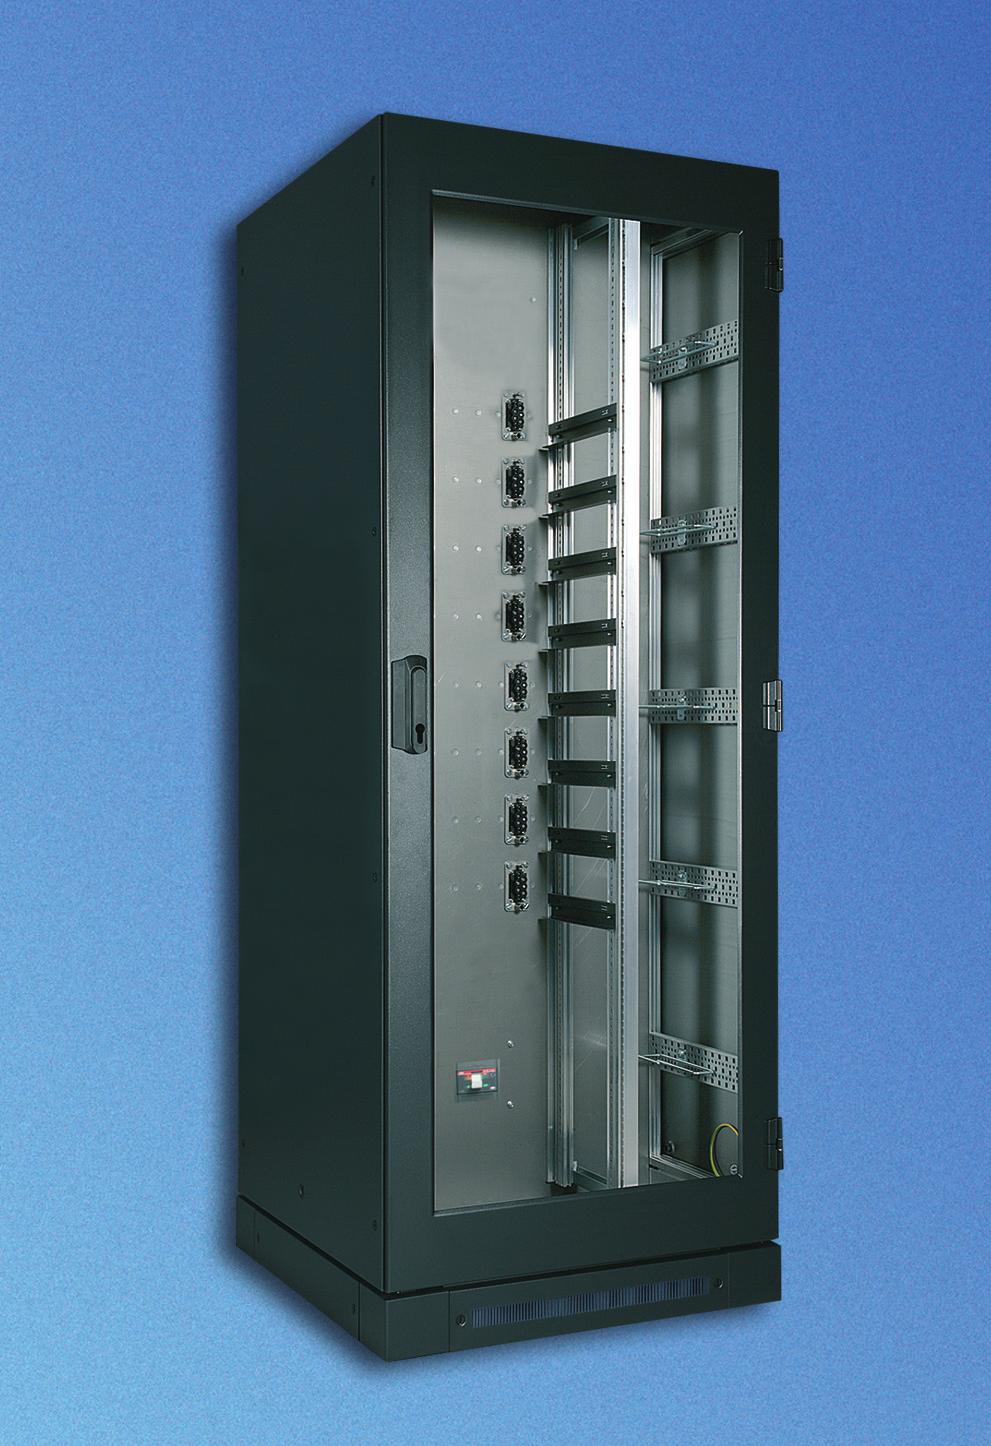 Power Distribution Rack Feed of 2 separate -phase 400V mains, L1, L2, L, N, PE Each with a 250A circuit breaker in the input Distribution to the individual plugs via busbars and contact-safe plug-in